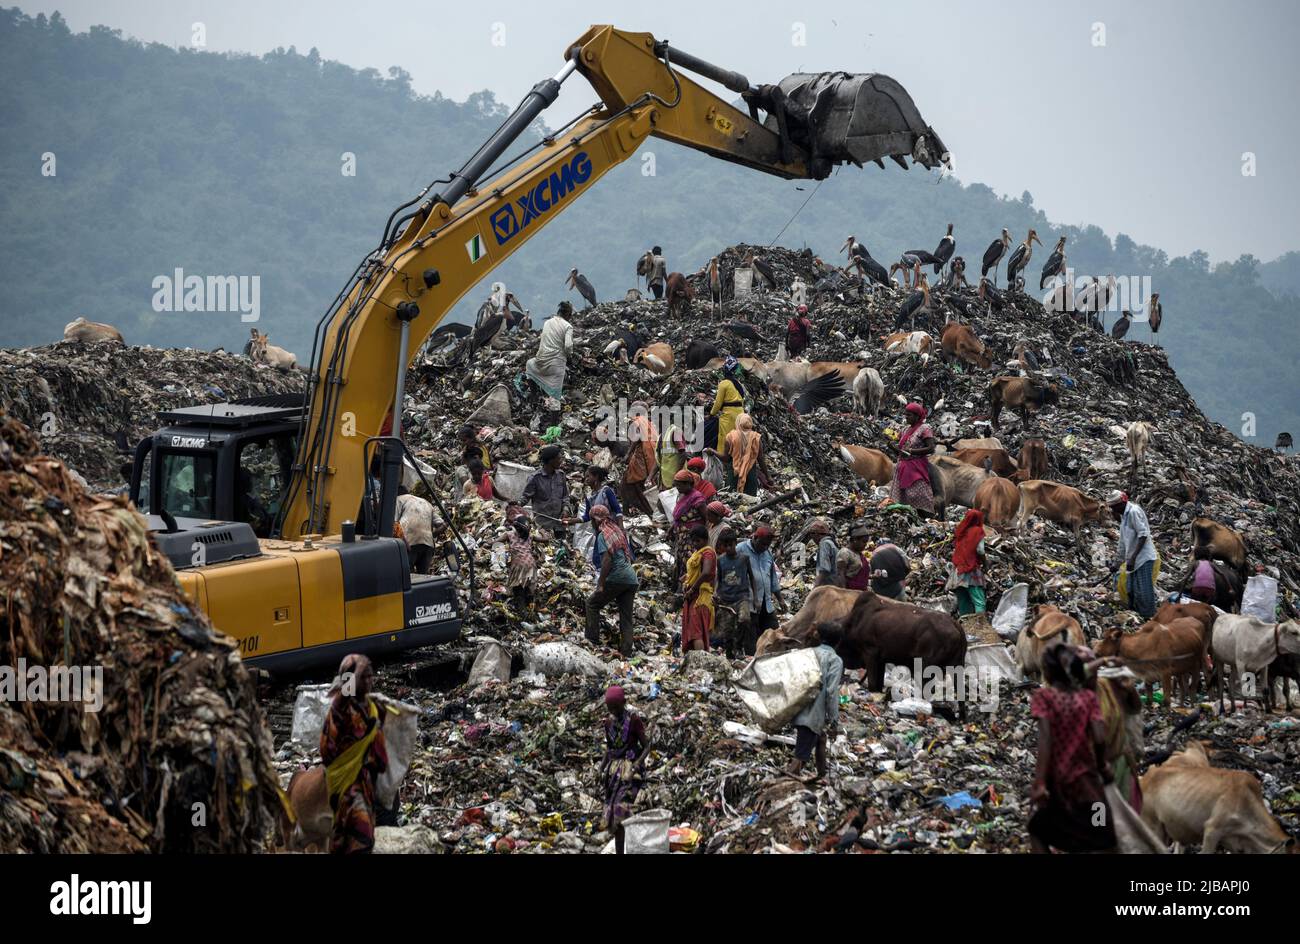 Municipality workers working with excavator as rag pickers searches for recyclable materials next to cows and birds at a garbage dumpsite, in Guwahati, Assam, India on 04 June 2022. World Environment Day 2022 is the biggest international day for the environment. Led by the United Nations Environment Programme (UNEP) on 05 June every year. Credit: David Talukdar/Alamy Live News Stock Photo